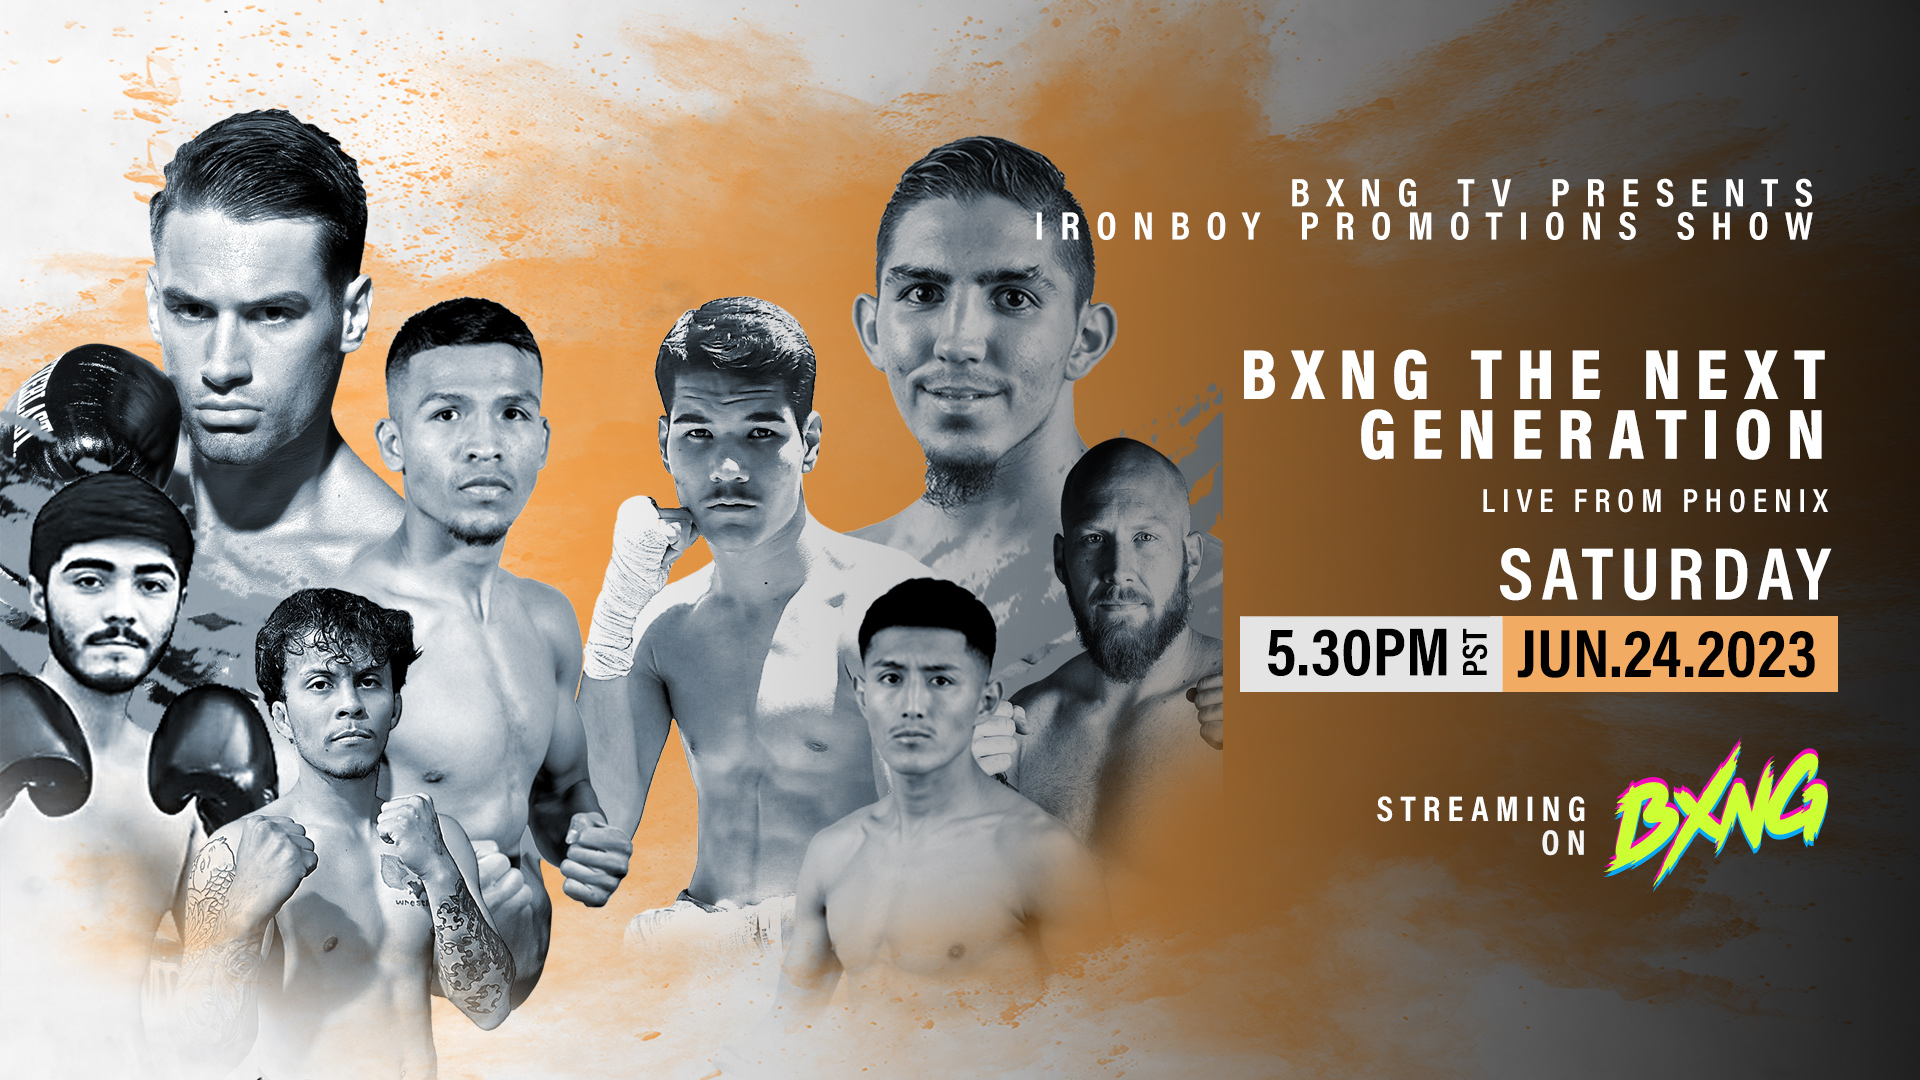 BXNG TV Presents Ironboy Promotions Show Live Stream 06/24/23